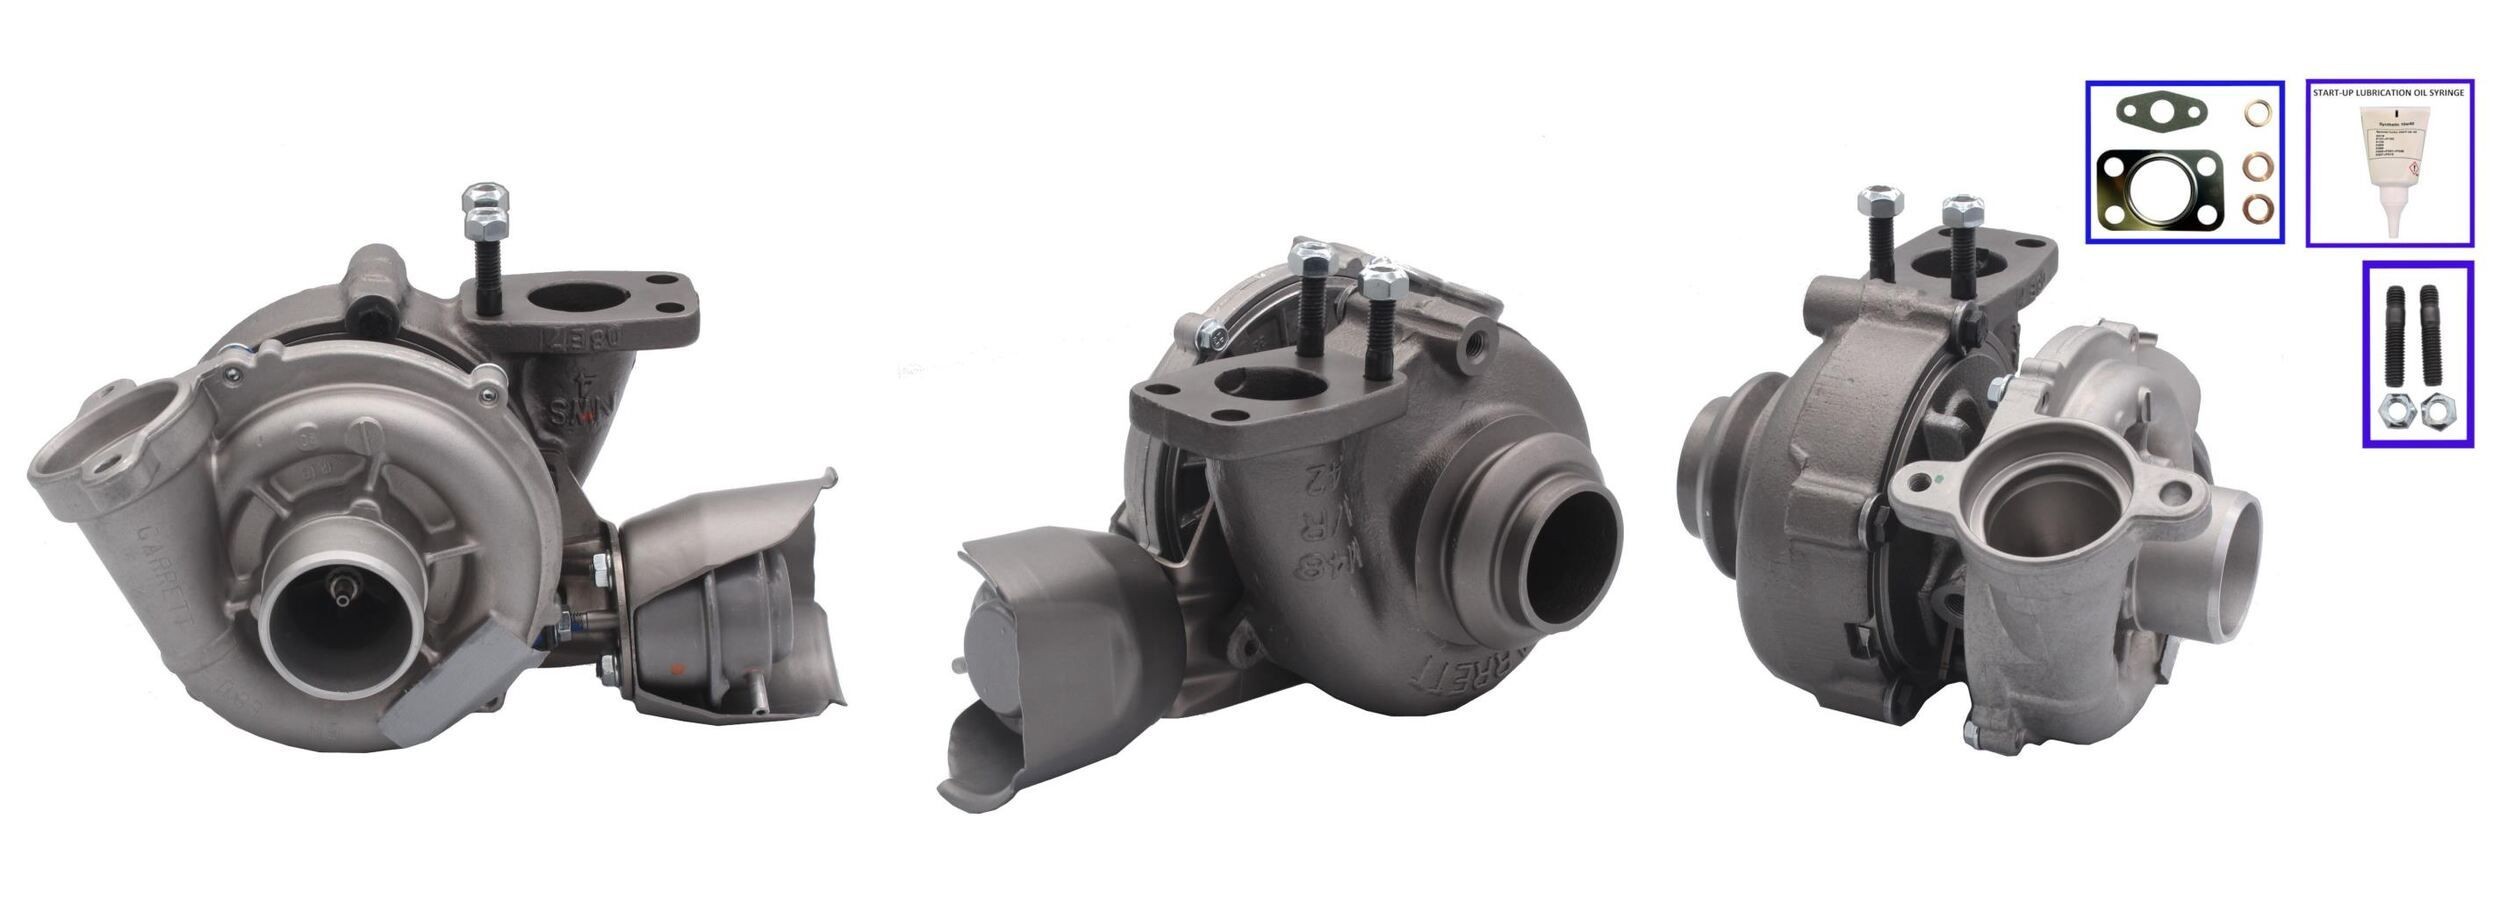 Mazda Turbocharger LUCAS LTRPA7534202 at a good price